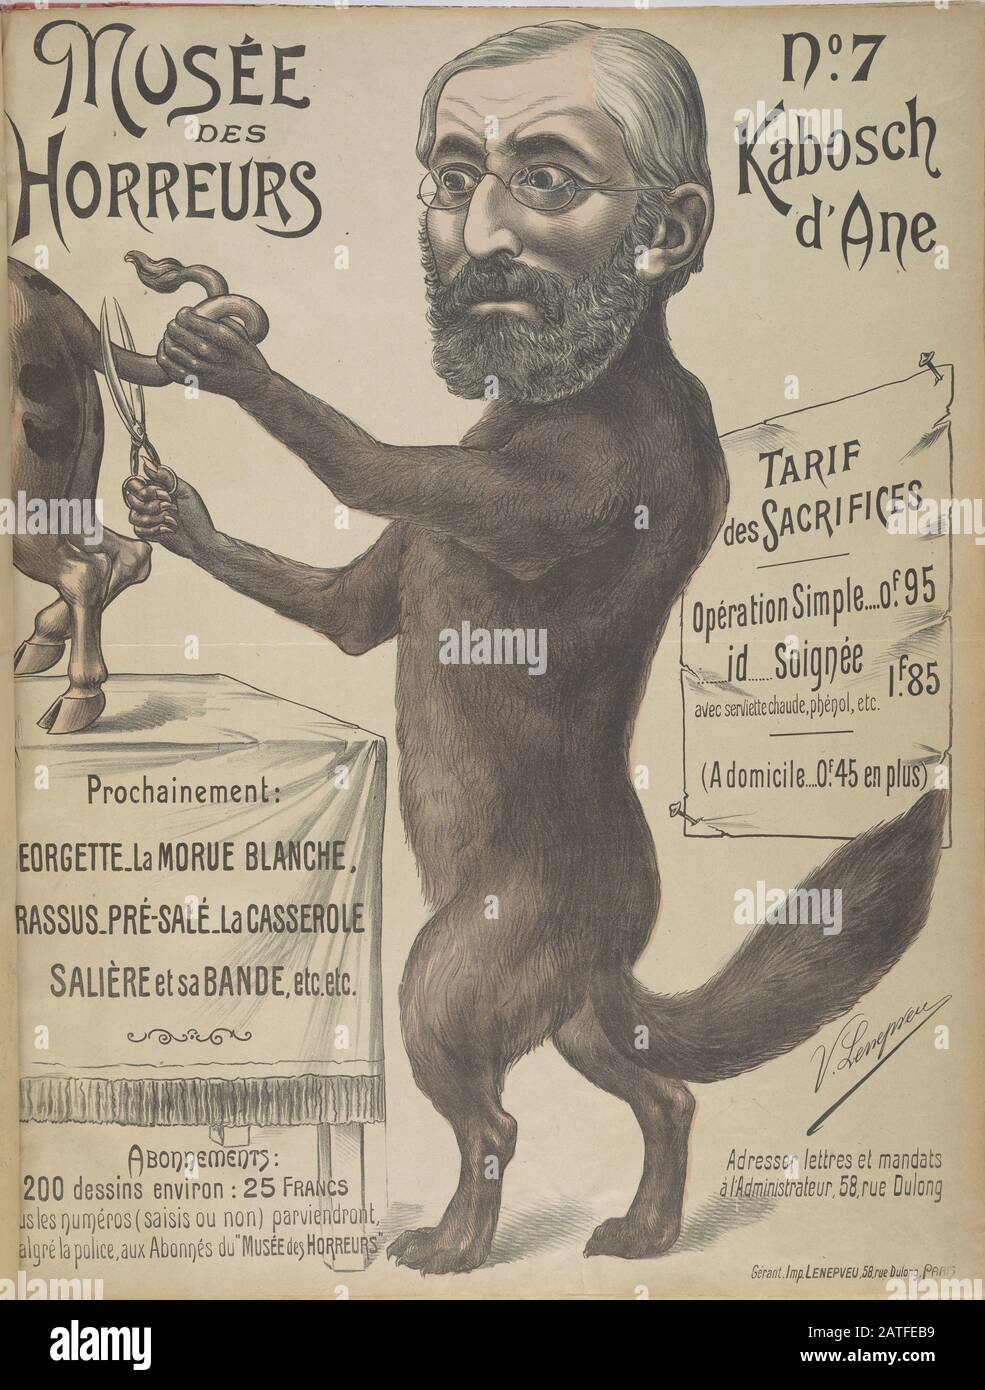 Musée des Horreurs -  No. 7 Kabosch d'Ane  -  1899  -  Lenepveu, V.  -  Caricature of Zadoc Kahn (1839-1905) as a wolf (or fox?) cutting the tail of a cow. Kahn was Alsatian-French rabbi and chief rabbi of France during the Dreyfus Affair. Hand colored. Stock Photo